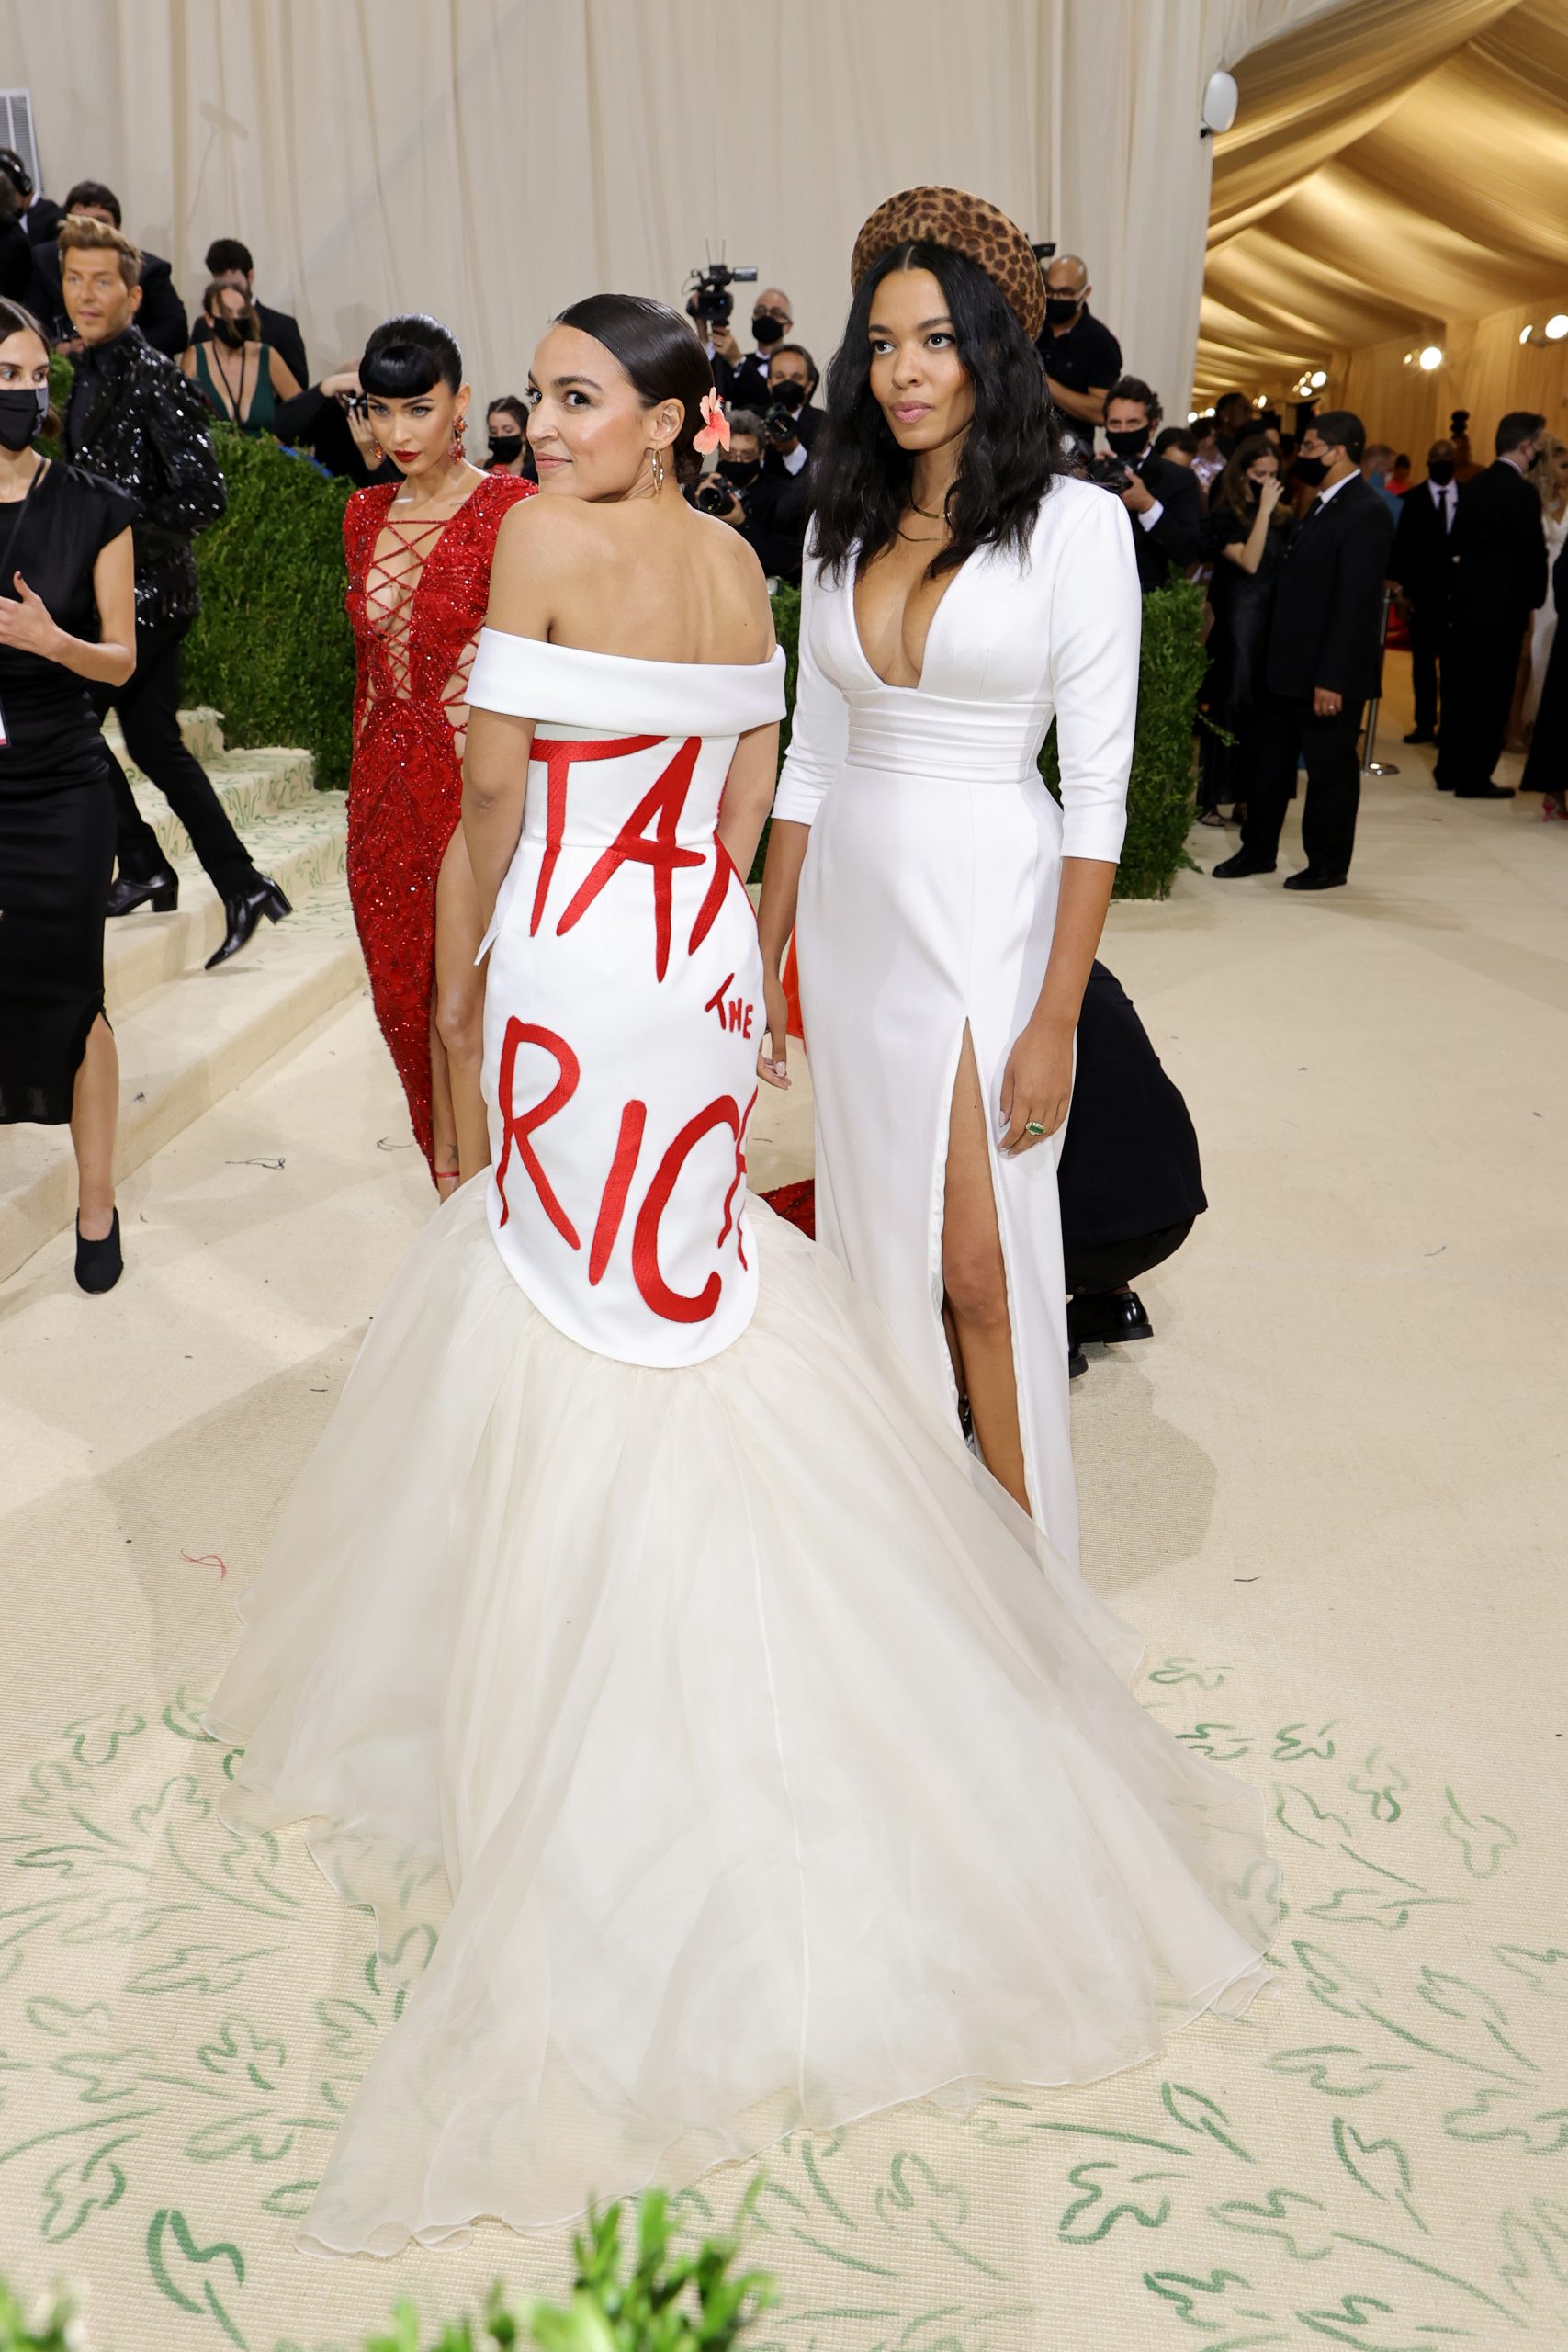 AOC's Met Gala Trip Meant Breaking Congressional Ethics Rules